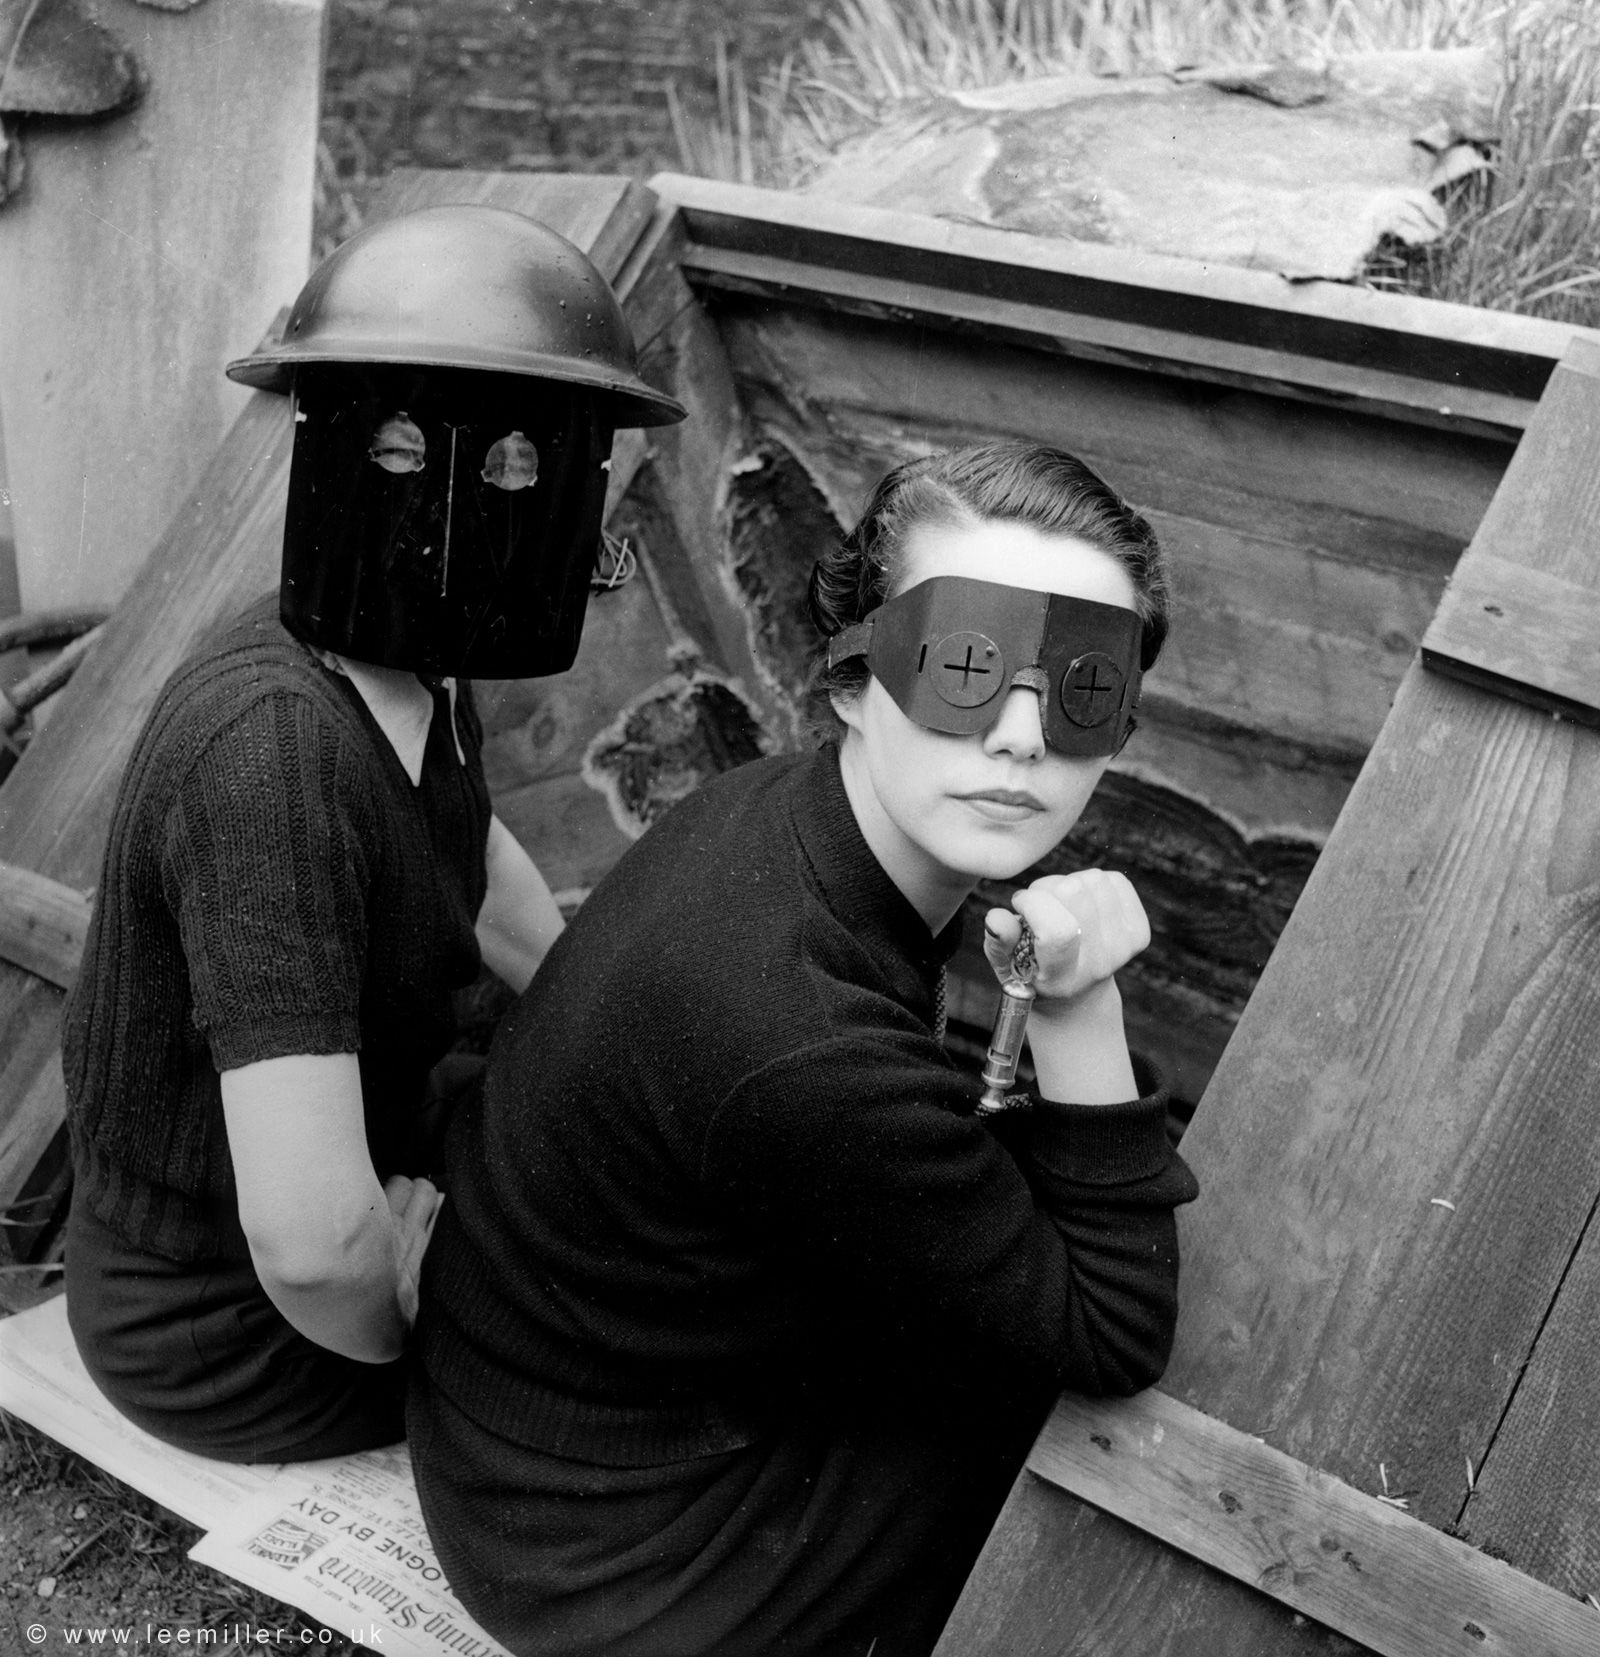 Models pose for Vogue by an air raid shelter in London during the Blitz, wearing masks worn to protect against incendiary bombs.